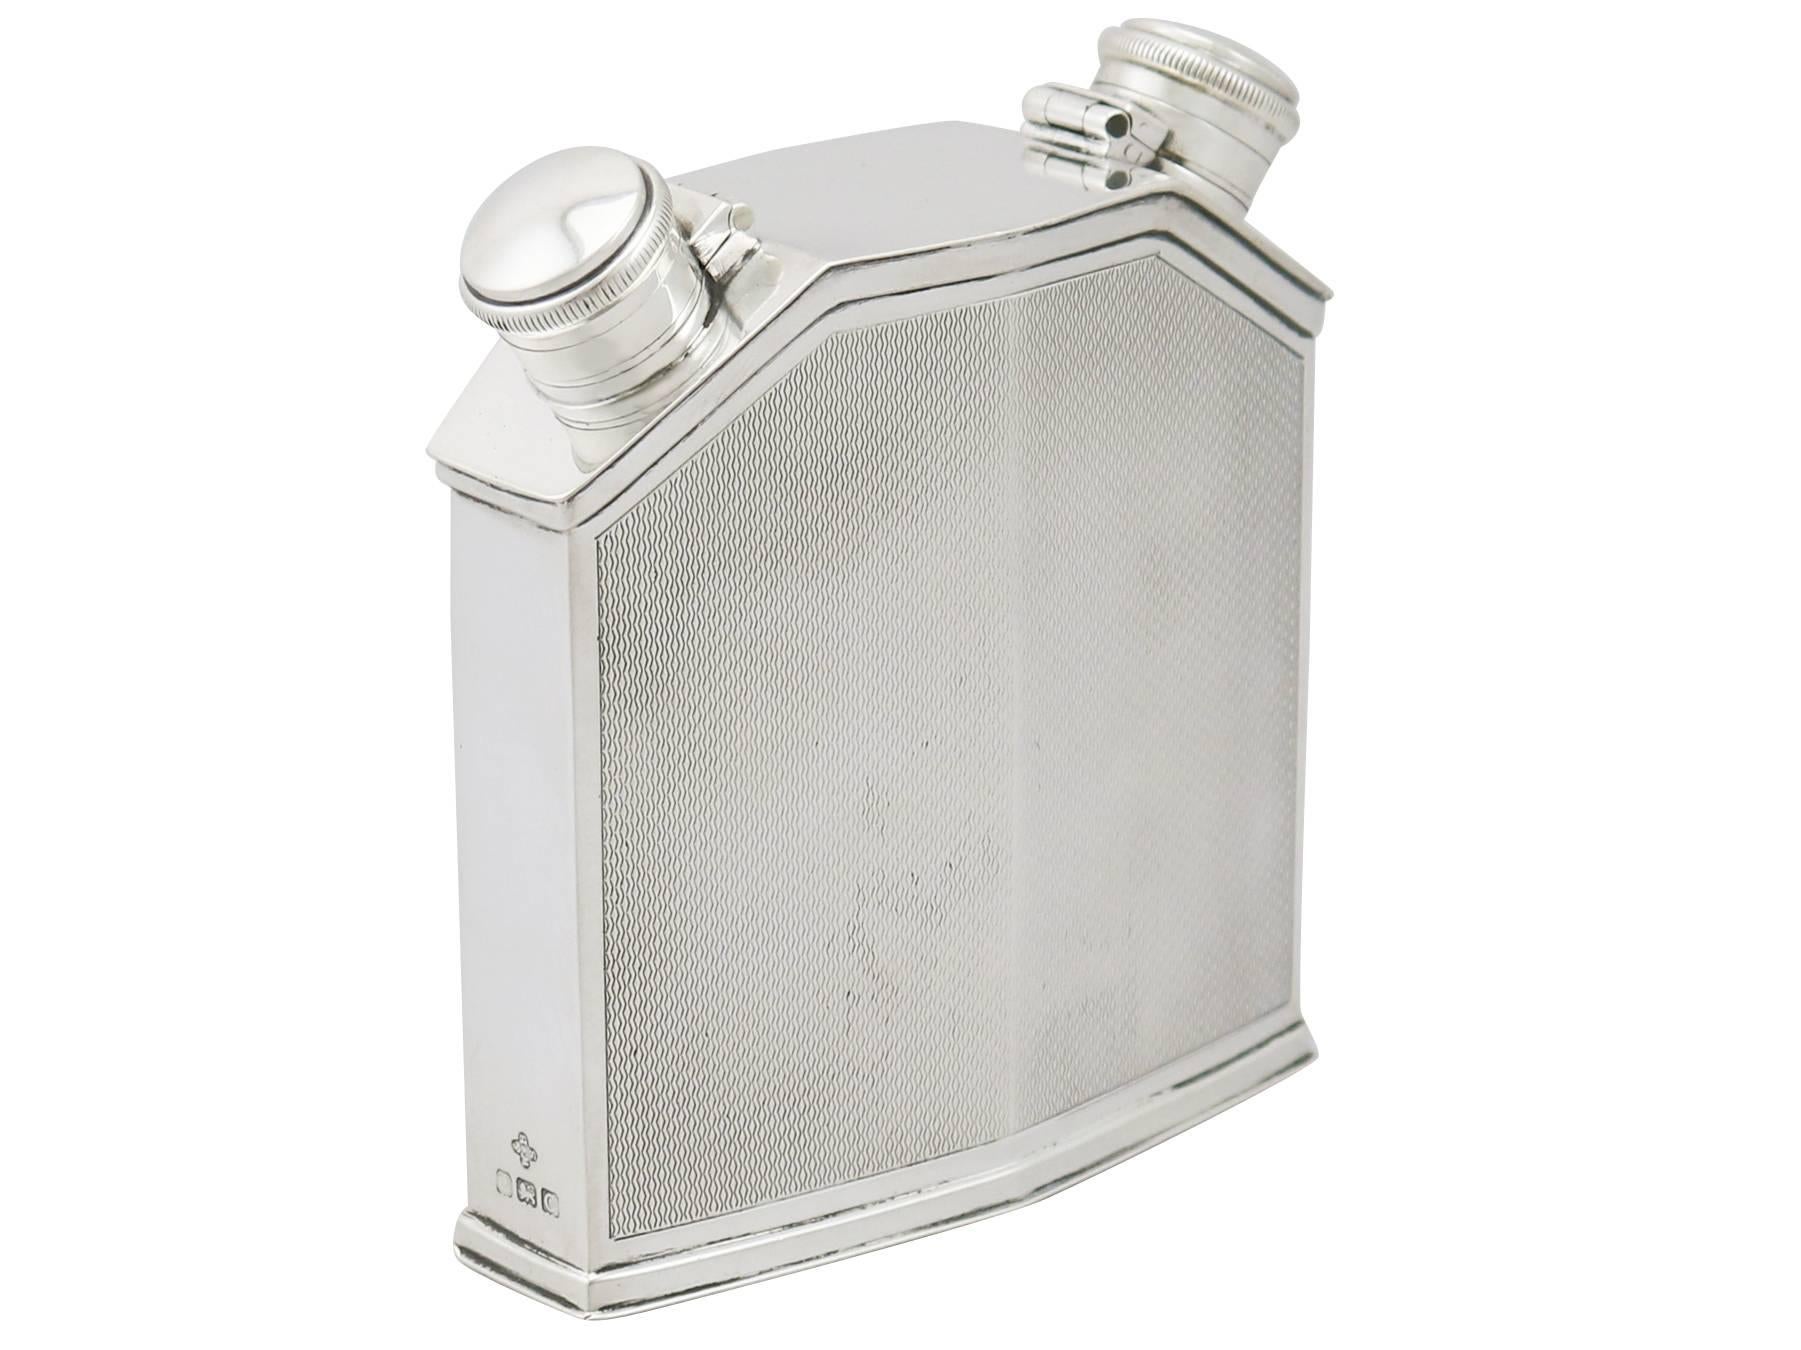 An exceptional, fine and impressive antique George V English sterling silver double hip flask; part of our wine and drinks related silverware collection.

This exceptional antique George V double hip flask in sterling silver has been modelled in